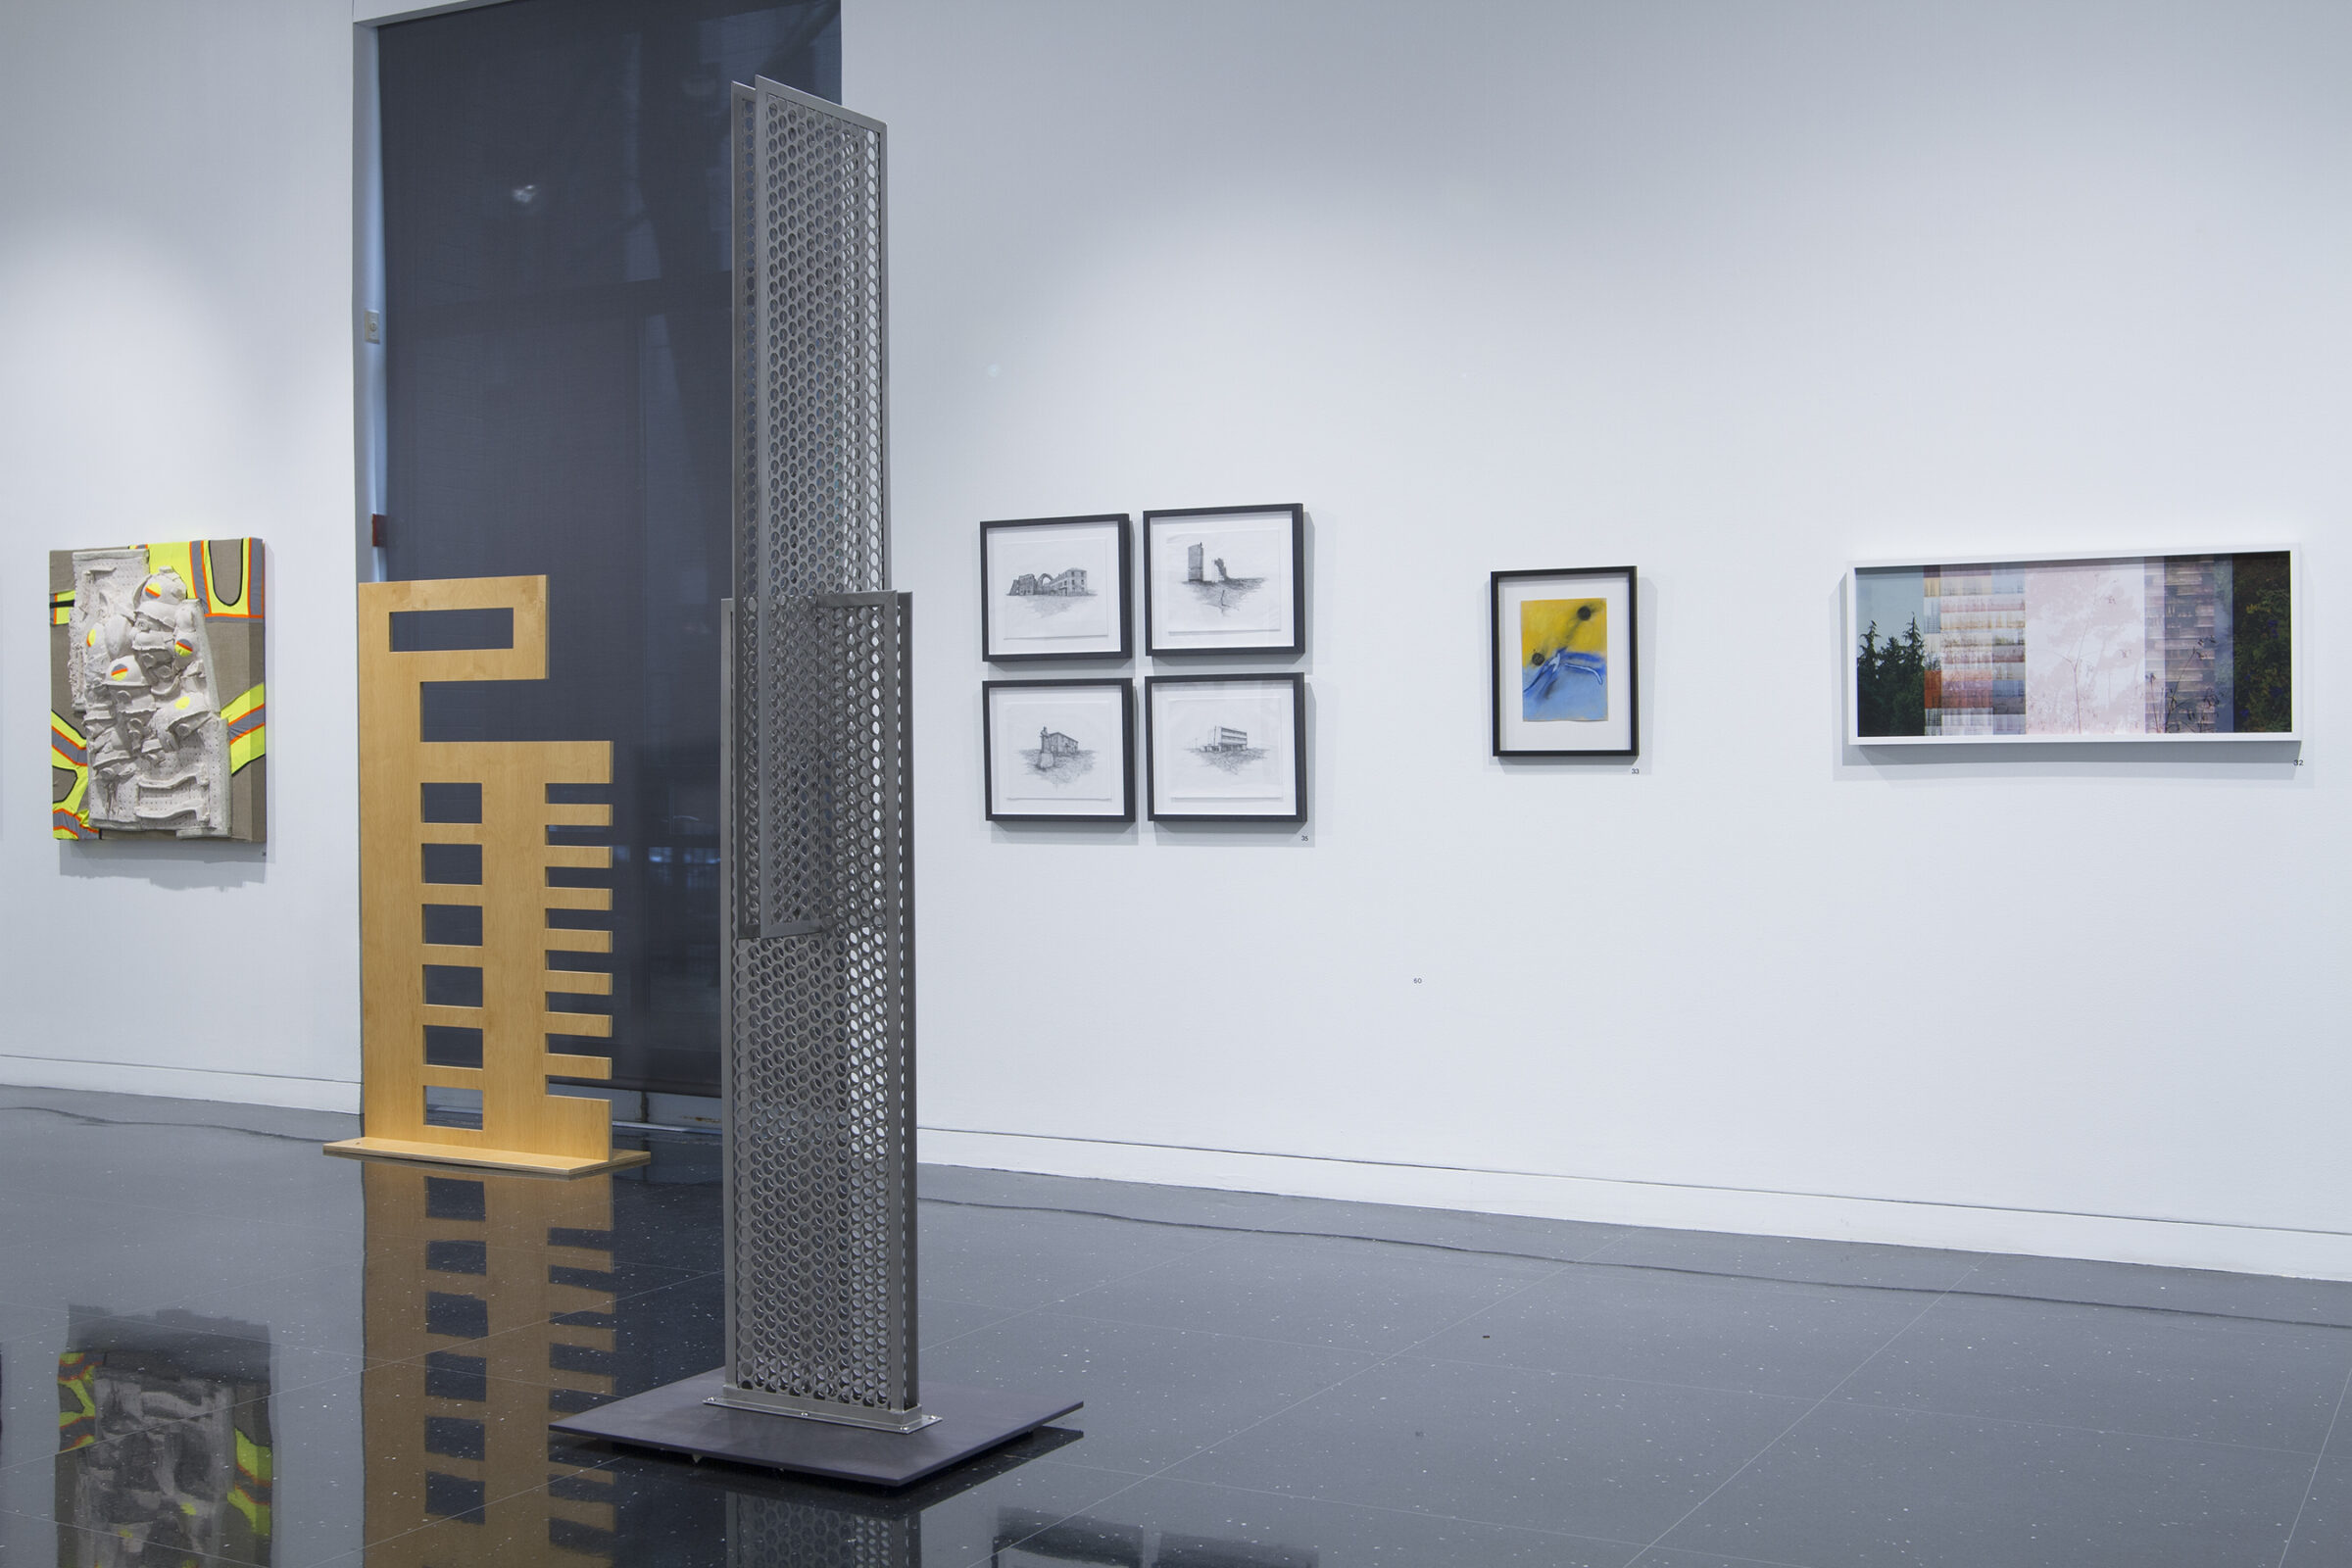 A large metal sculpture perforated by a grid of holes stands in the white gallery closest to the viewer. Behind it are four small framed images arranged in a grid, and next to those, framed by a large window is a wood sculpture with square holes and rectangular notches cut out of it.